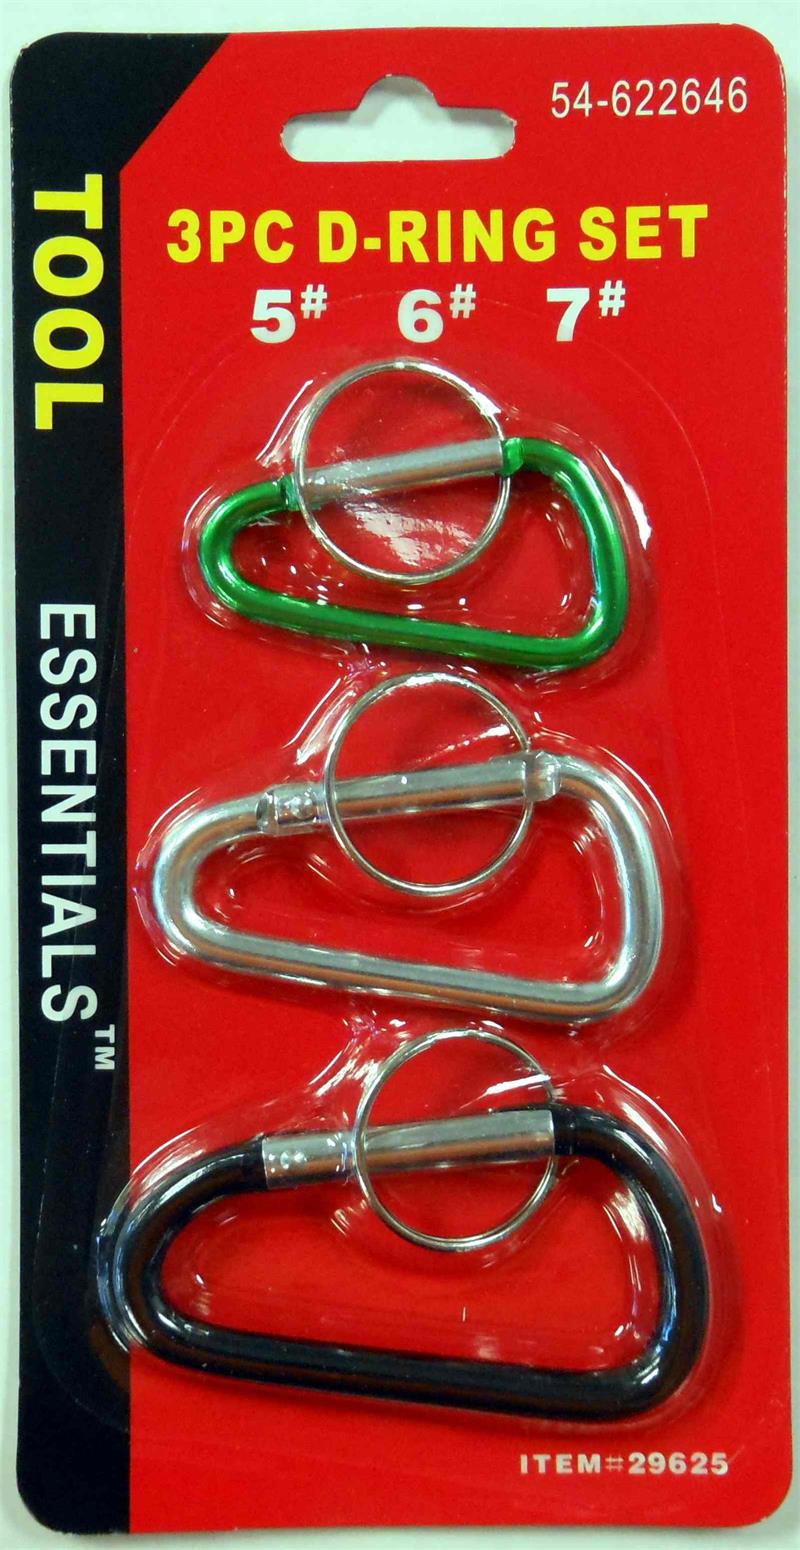 ''3-Piece D-RING Set with Key RINGs (#5, #6 & #7)''